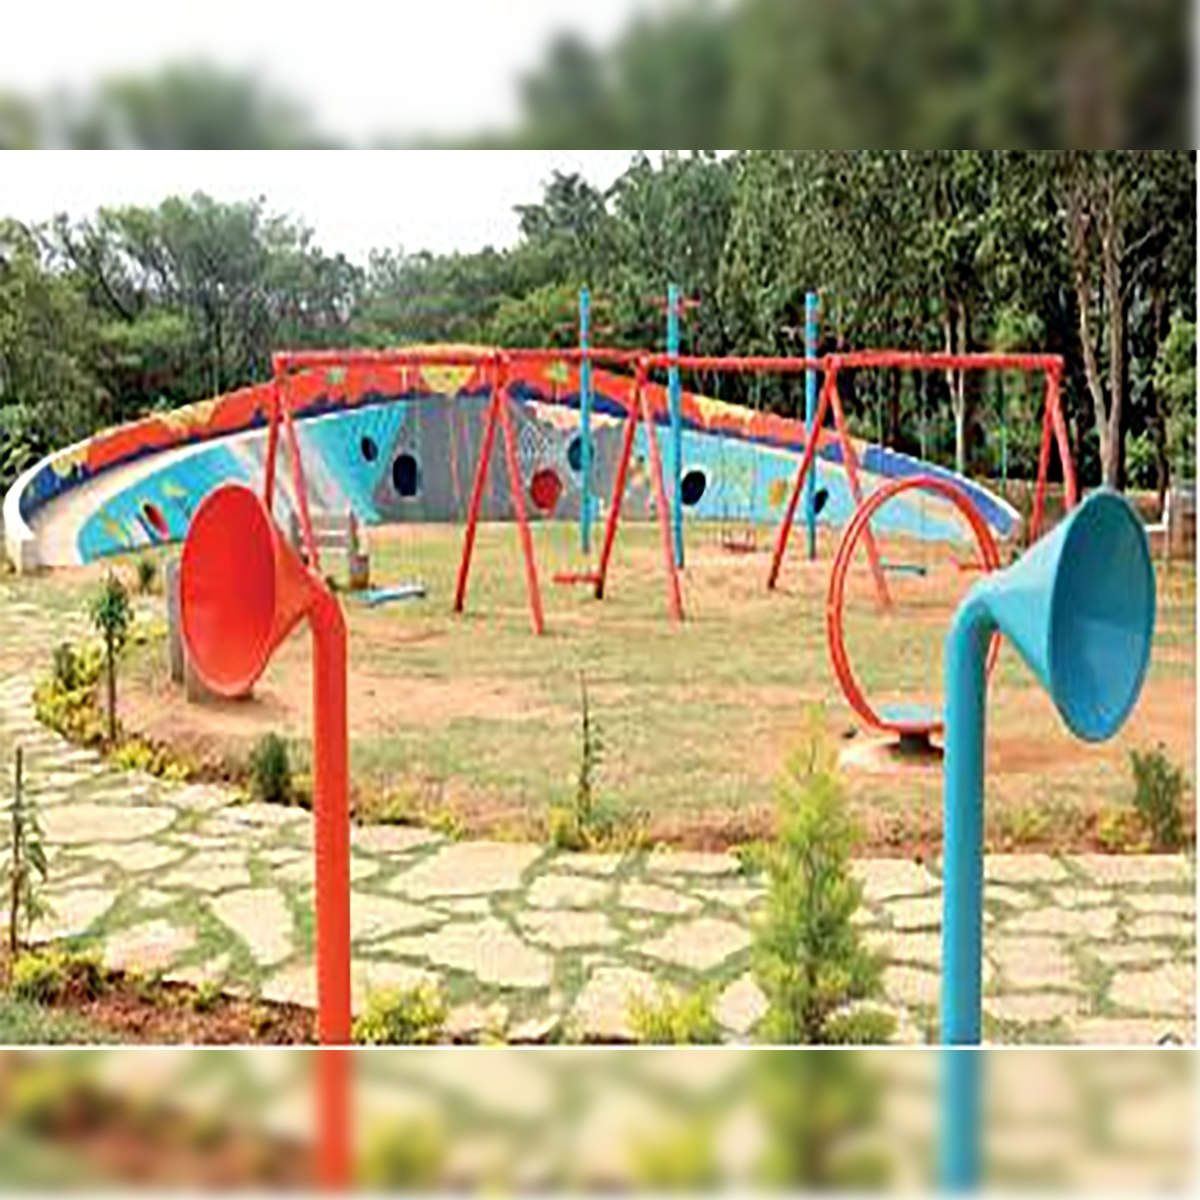 Buy The People in the Playground Book Online at Low Prices in India